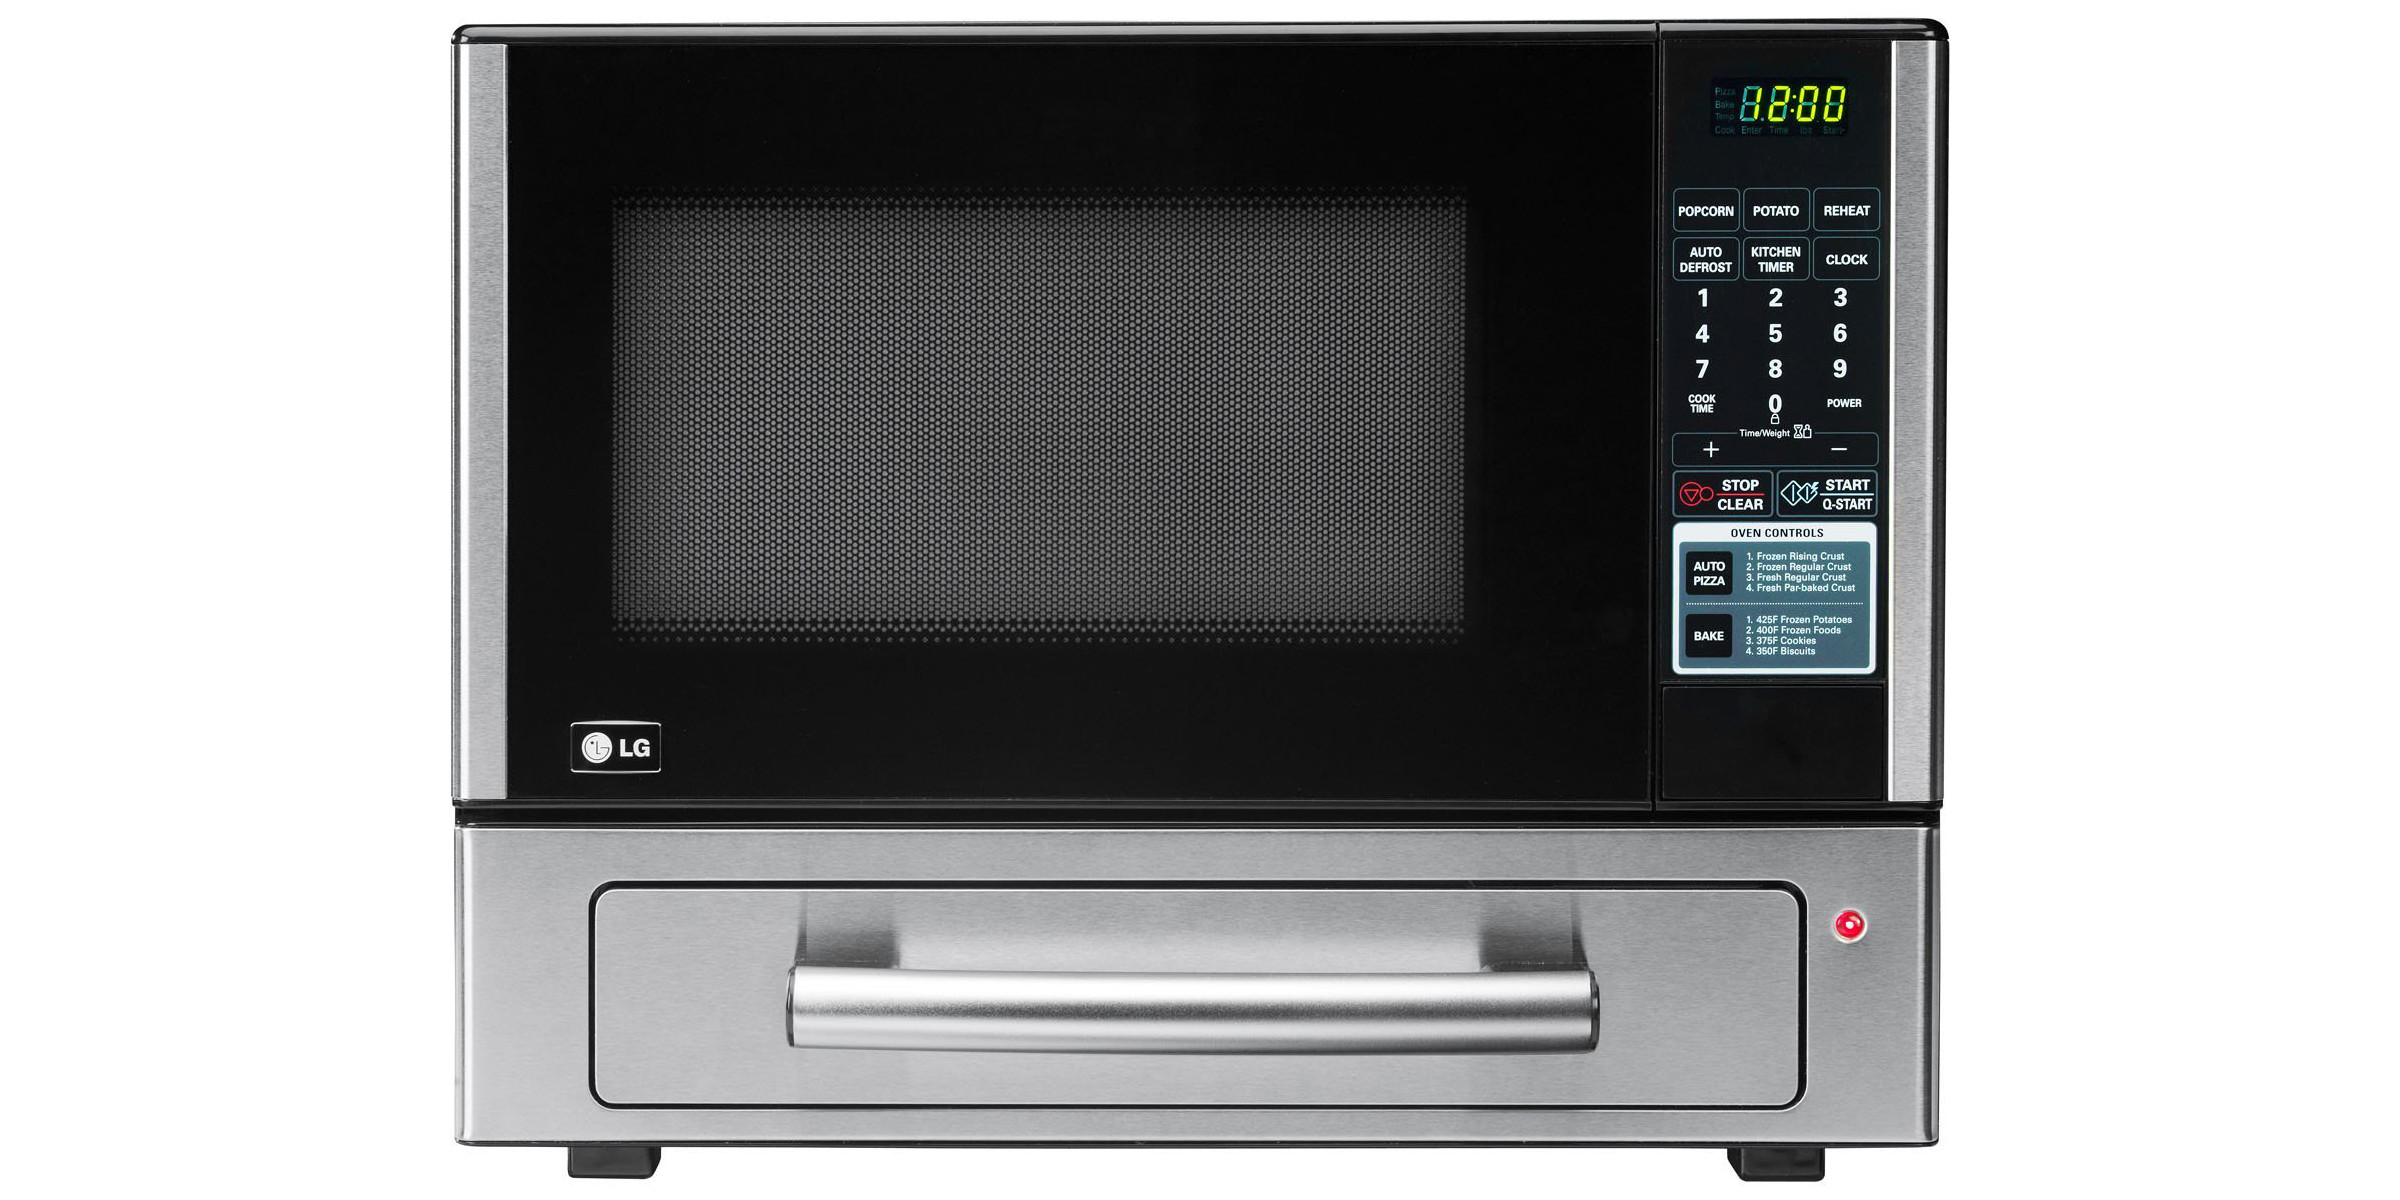 Microwave Oven and Toaster from LG